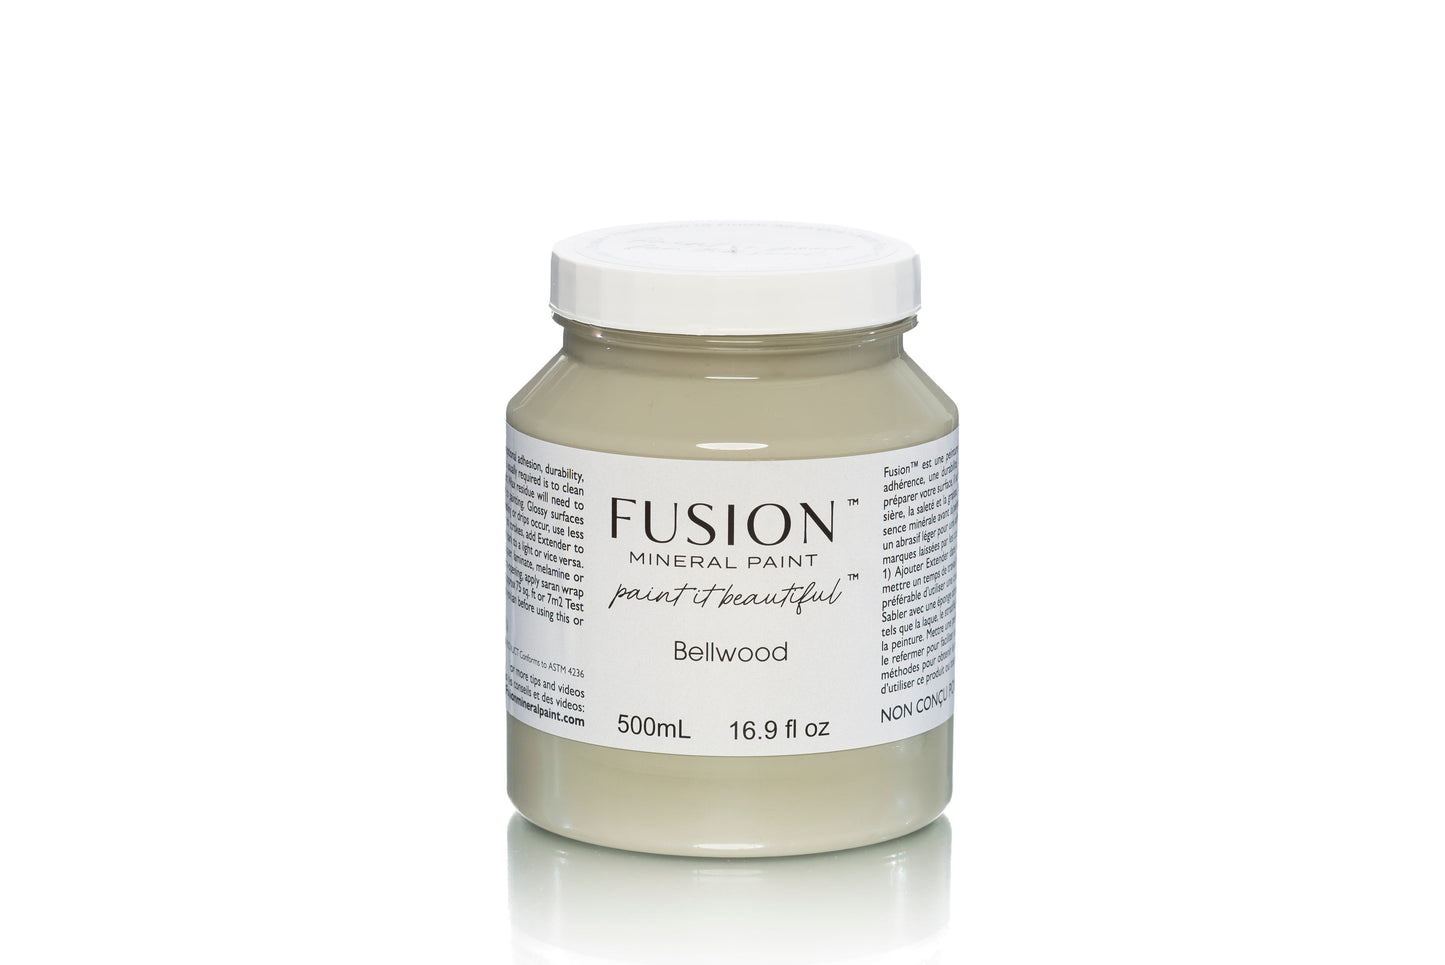 Bellwood Fusion Mineral Paint, Sage Green Paint Color| 500ml Pint Size